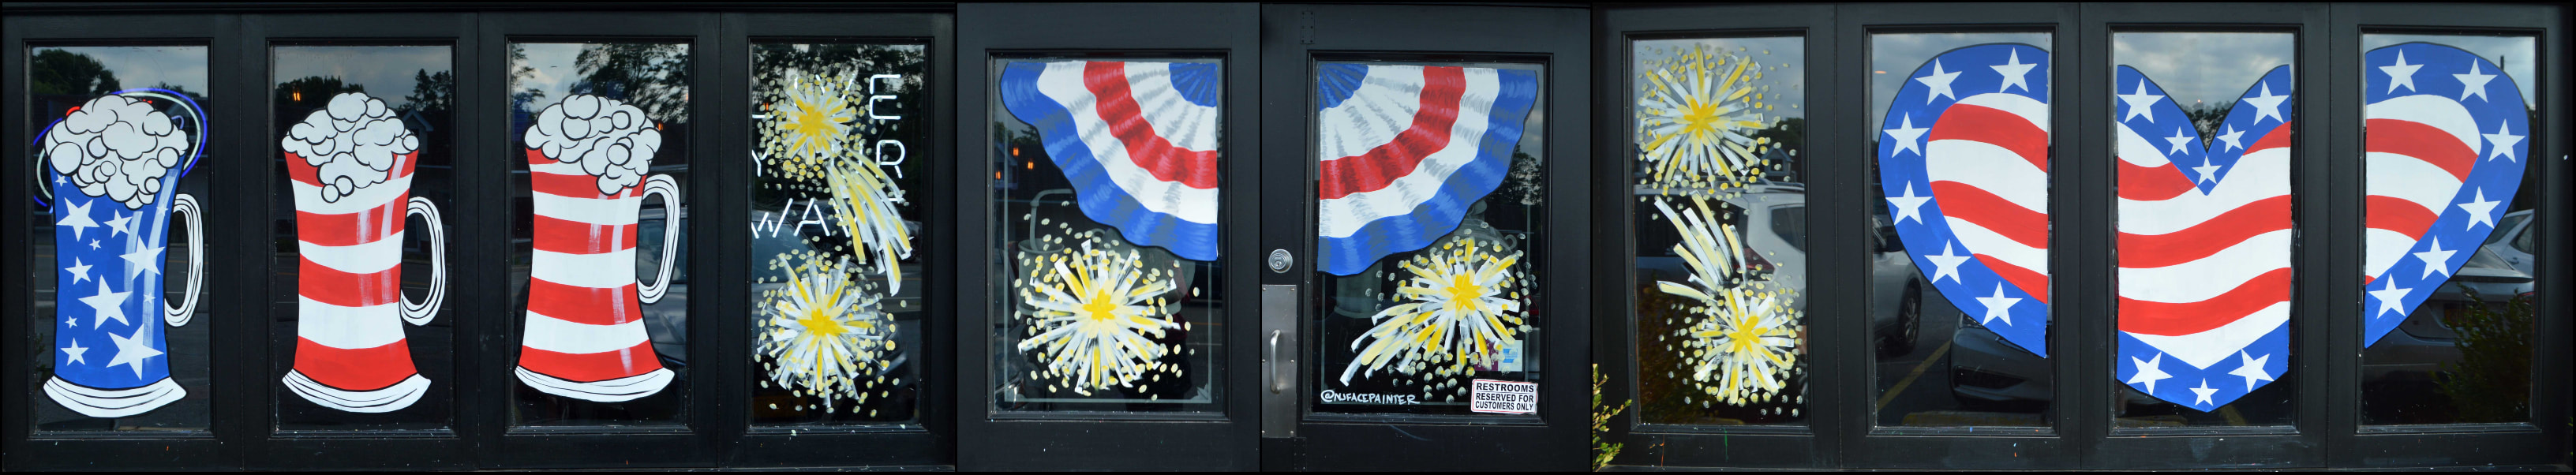 Independence Day Window Art at The Copper Still in Pomona, Rockland County, NY for July 4